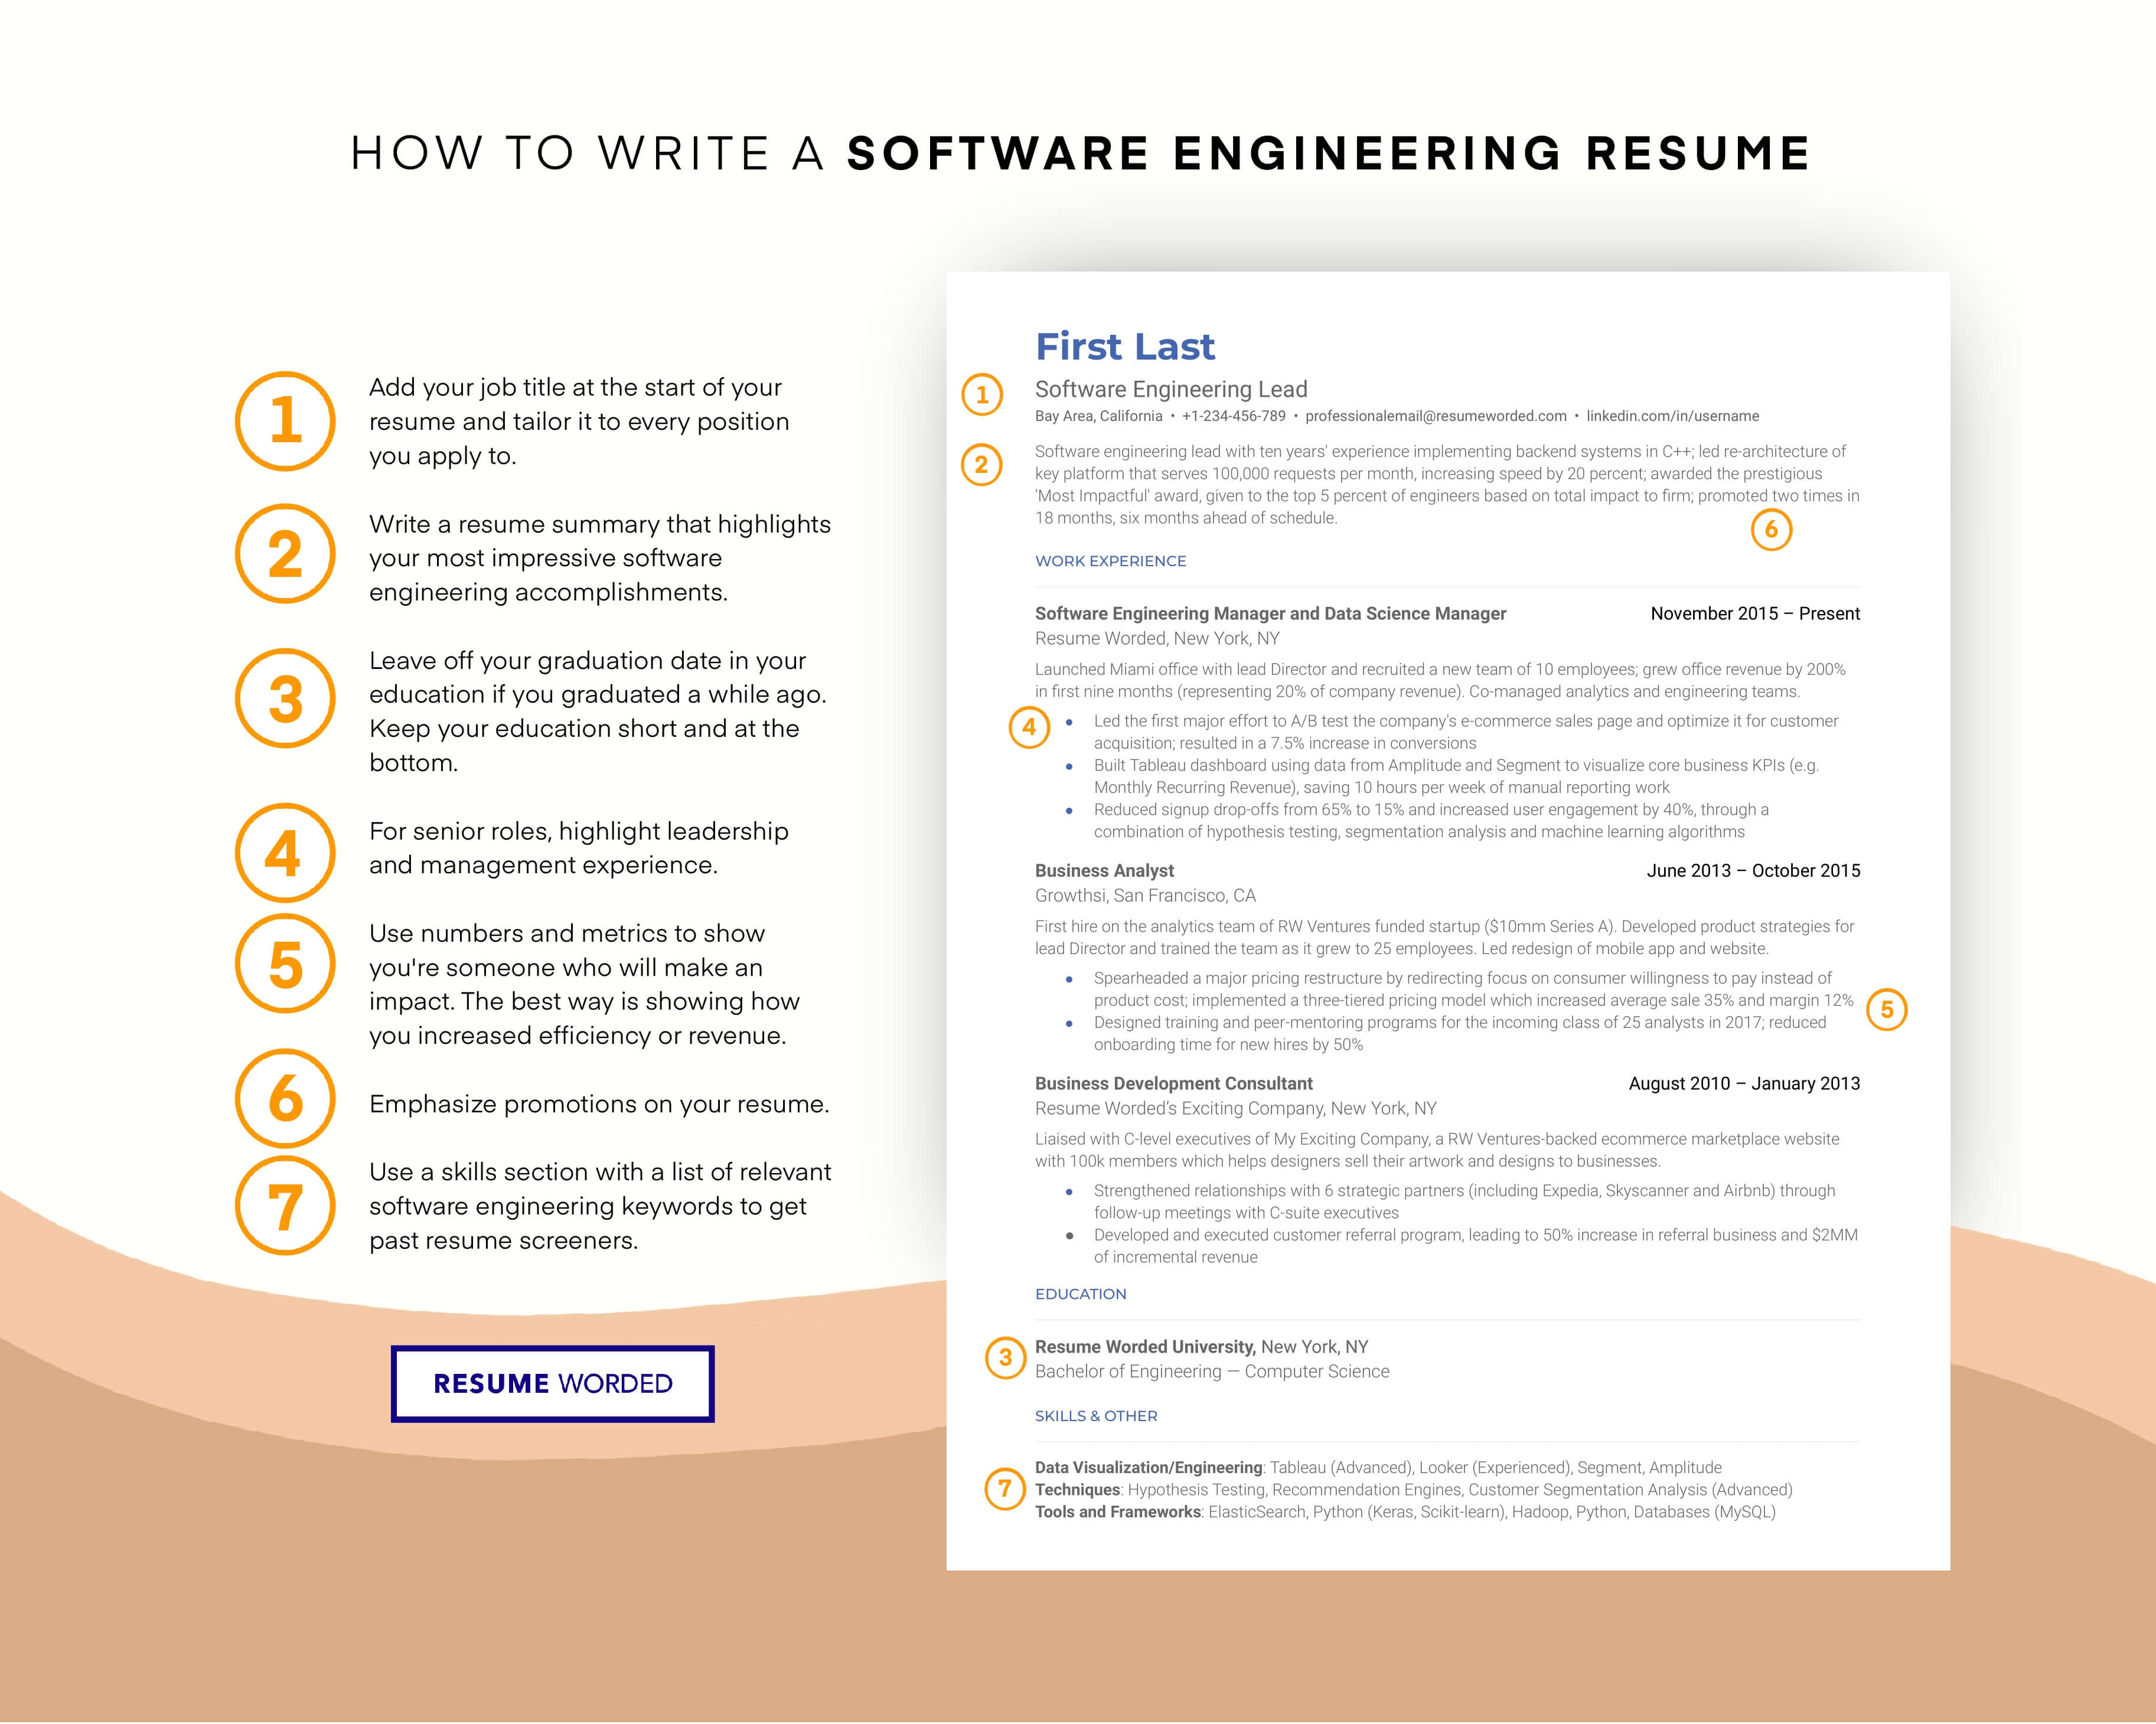 Include software development experience from school. - Entry-Level Java Developer Resume